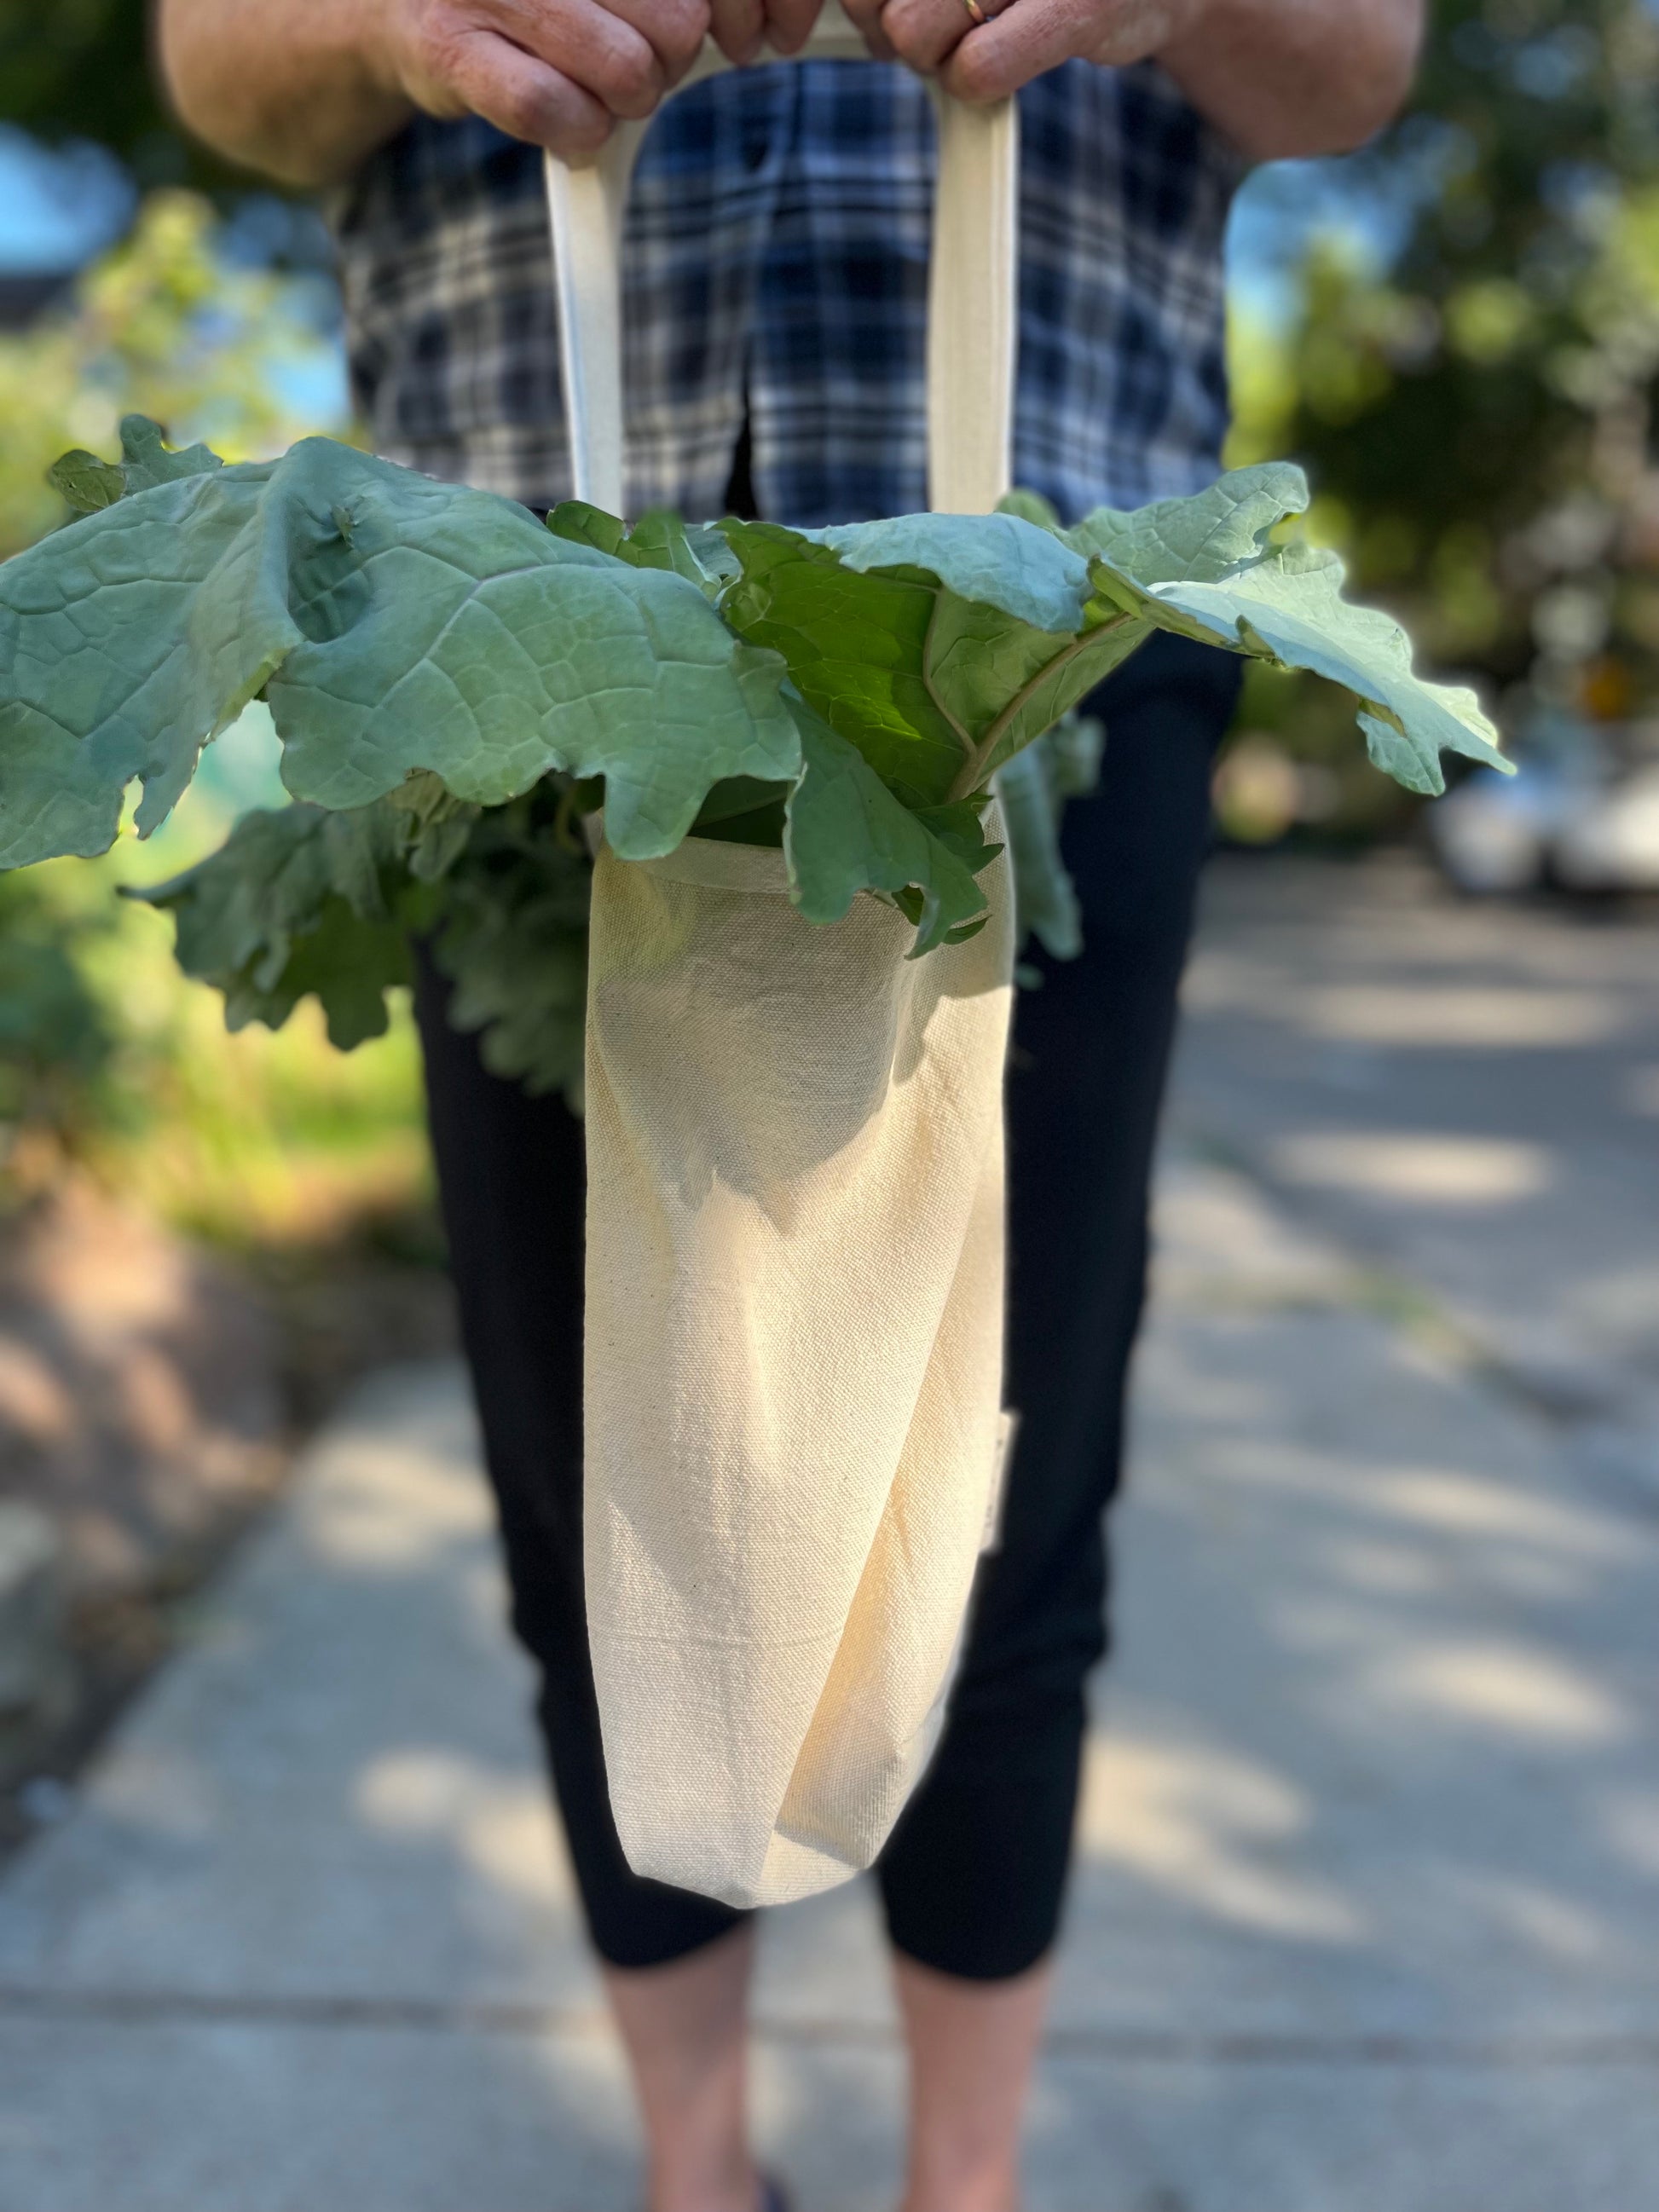 A woman holds a one-handled cotton canvas tote. Lacinato kale sticks out the top. A city sidewalk is blurred in the backgrounds